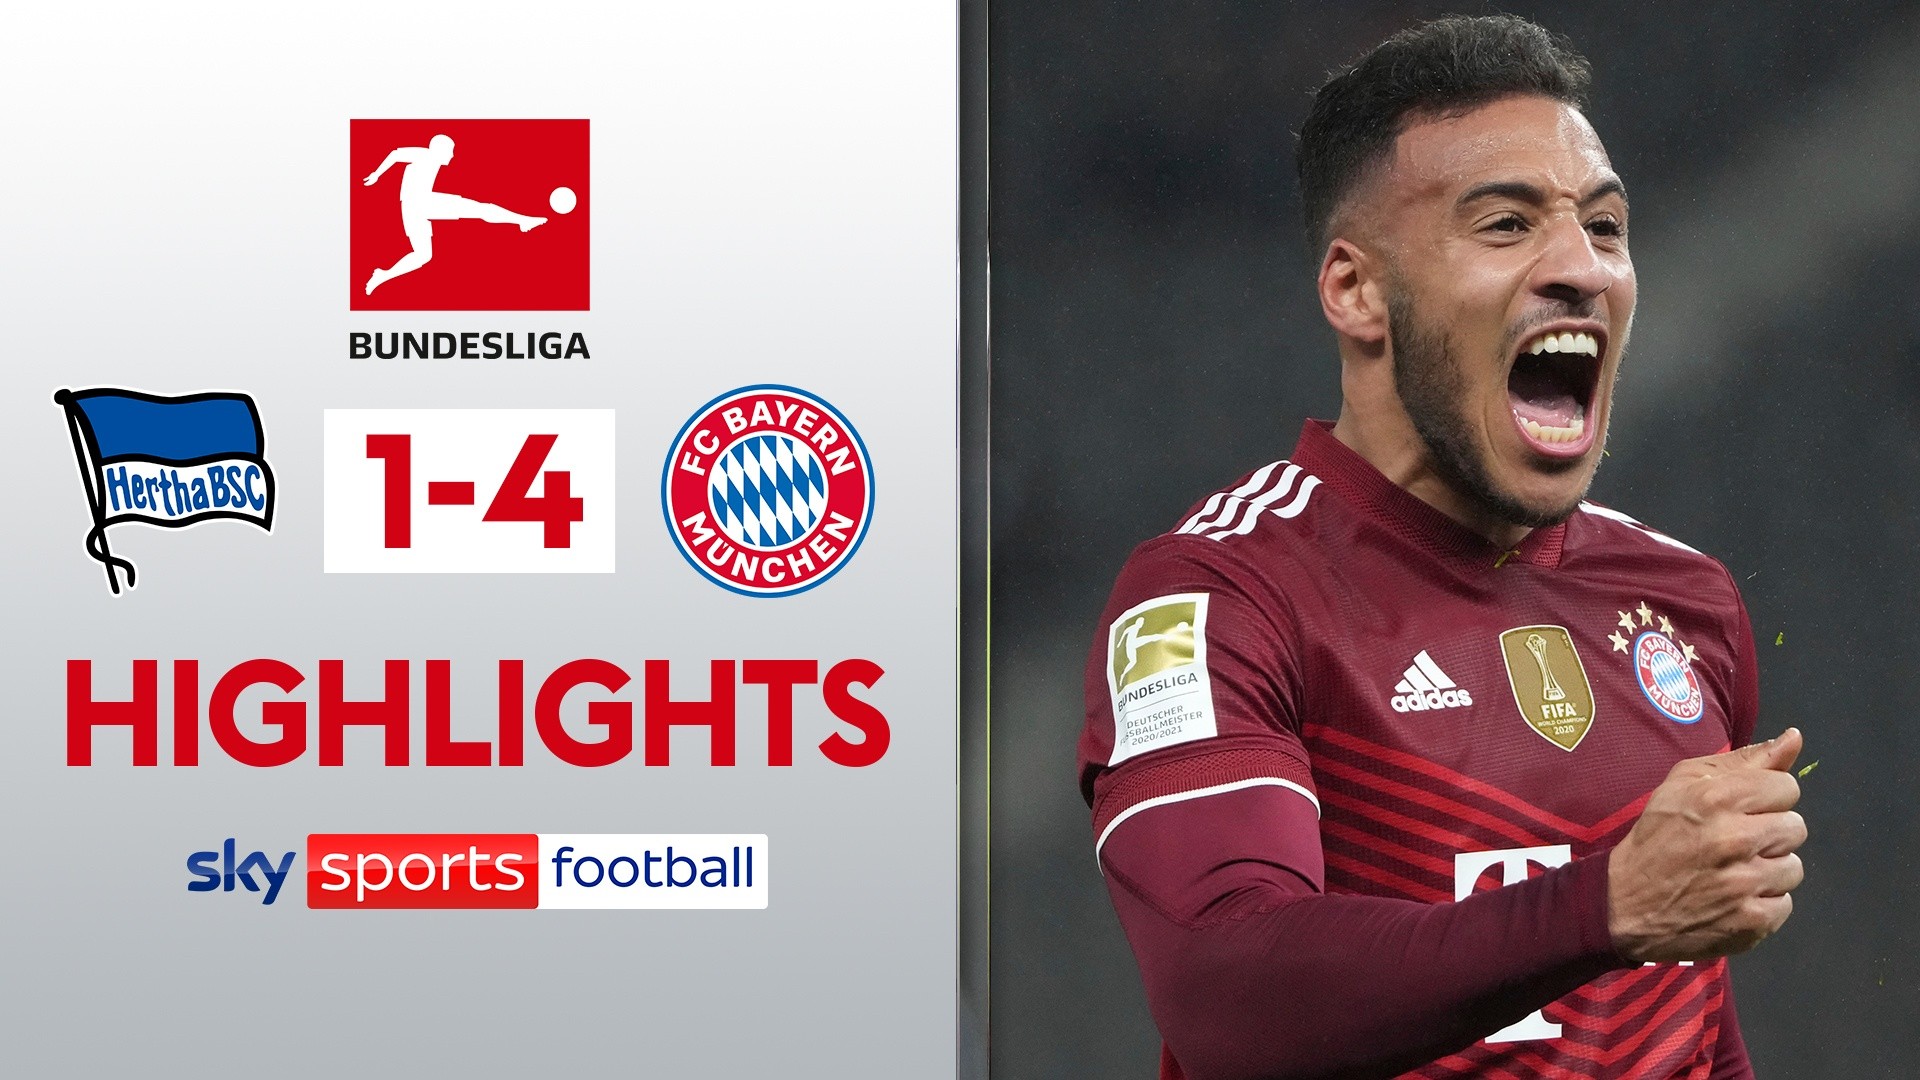 få øje på Efternavn Philadelphia Sky Sports on Twitter: "Bayern Munich extended their lead at the top of the  Bundesliga to 6⃣ points with a big win at Hertha Berlin...🇩🇪🔥 Here are  the highlights! 🎬 https://t.co/Z5Pz3k0Znx" /